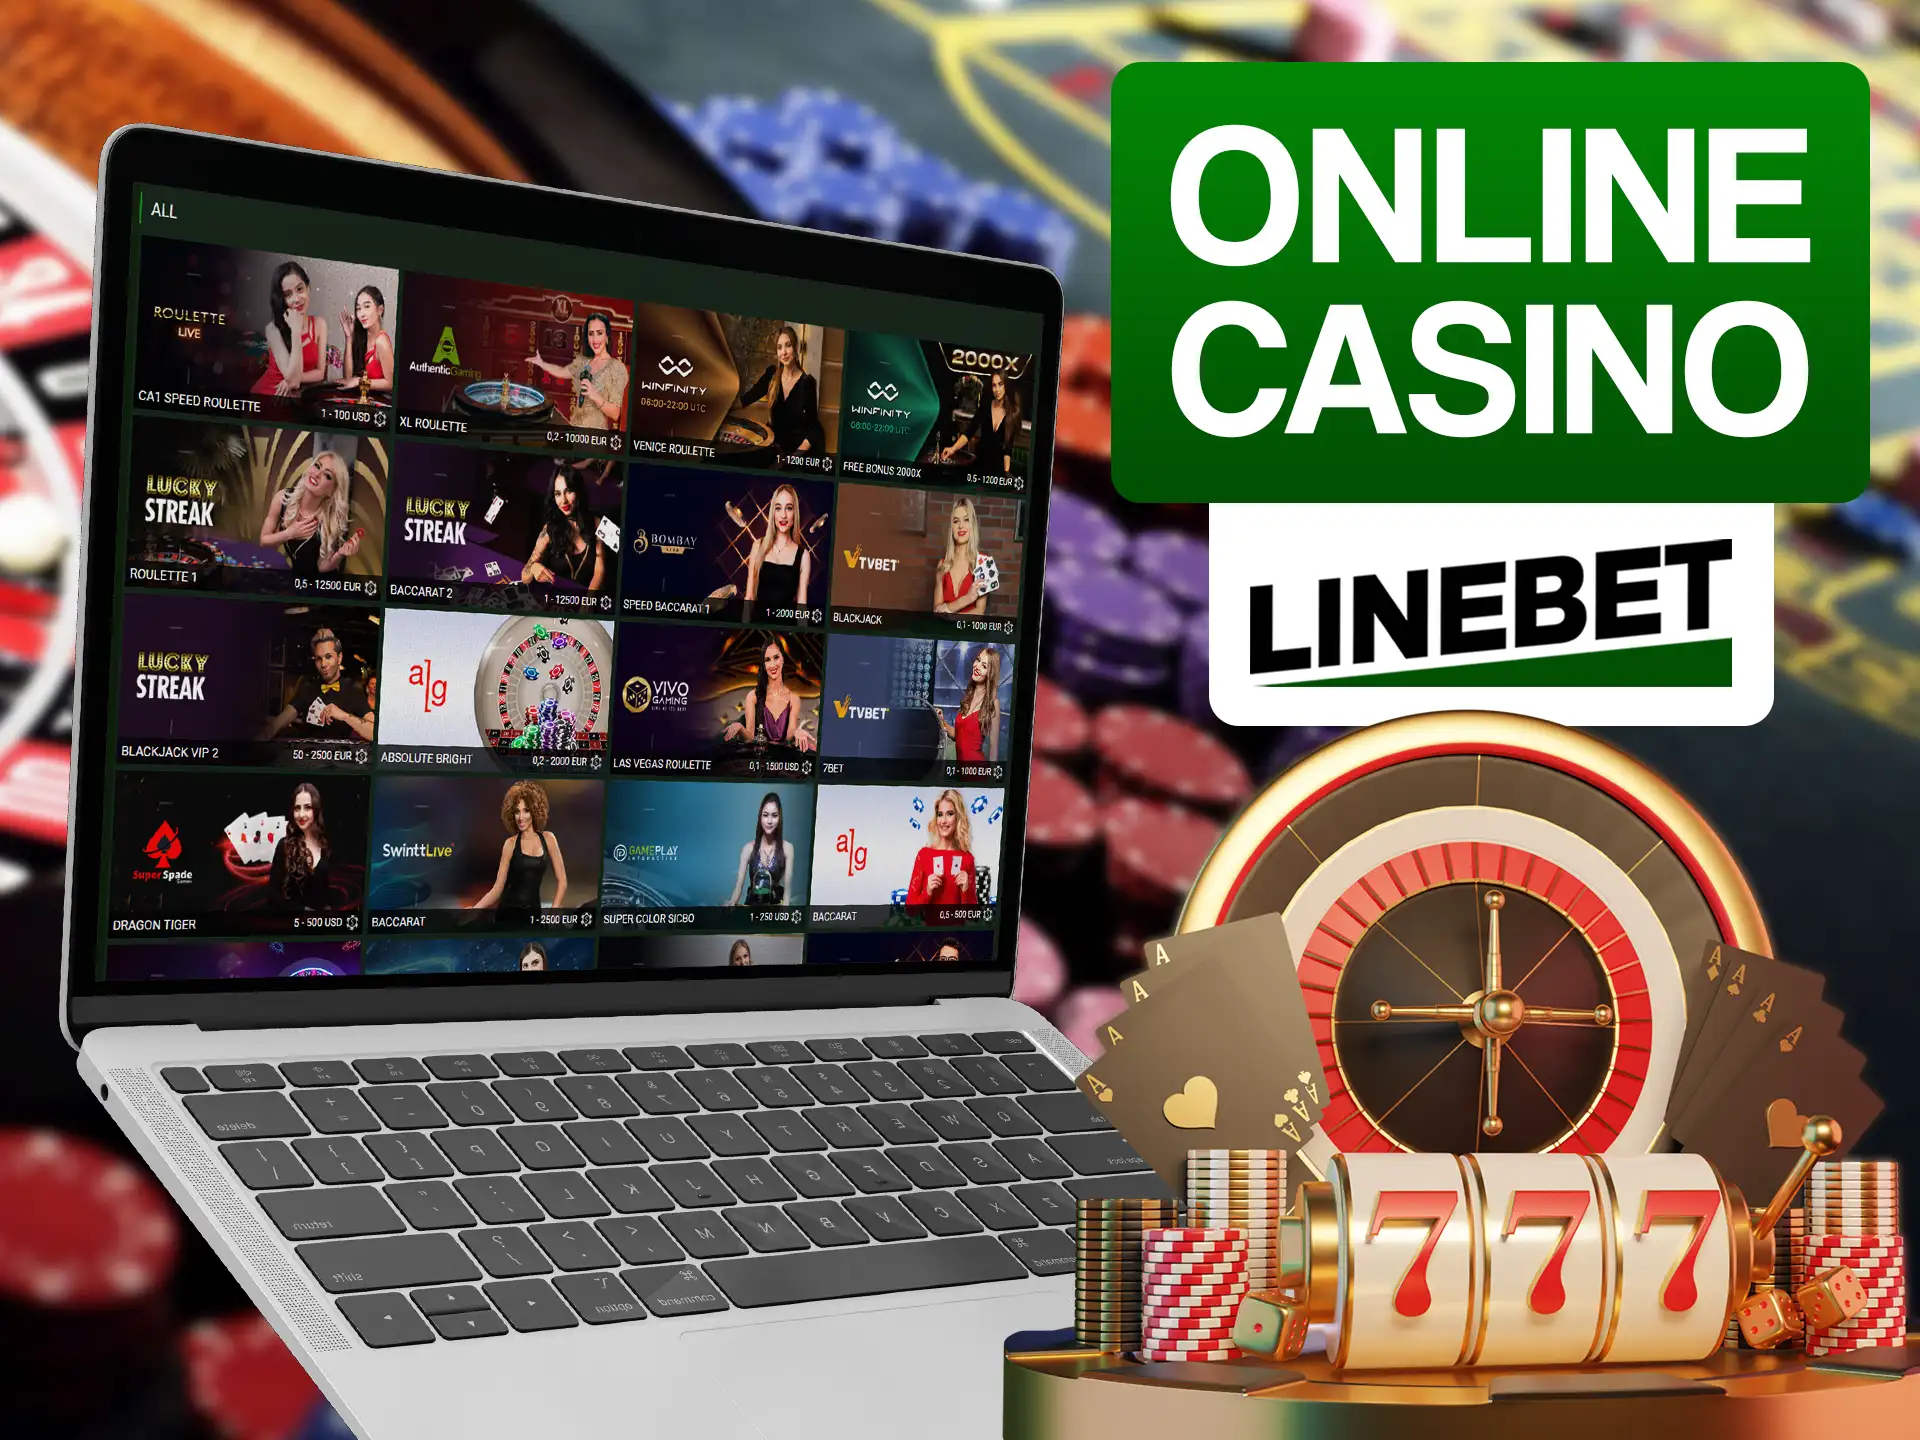 Visit Linebet casino and play your favourite games.